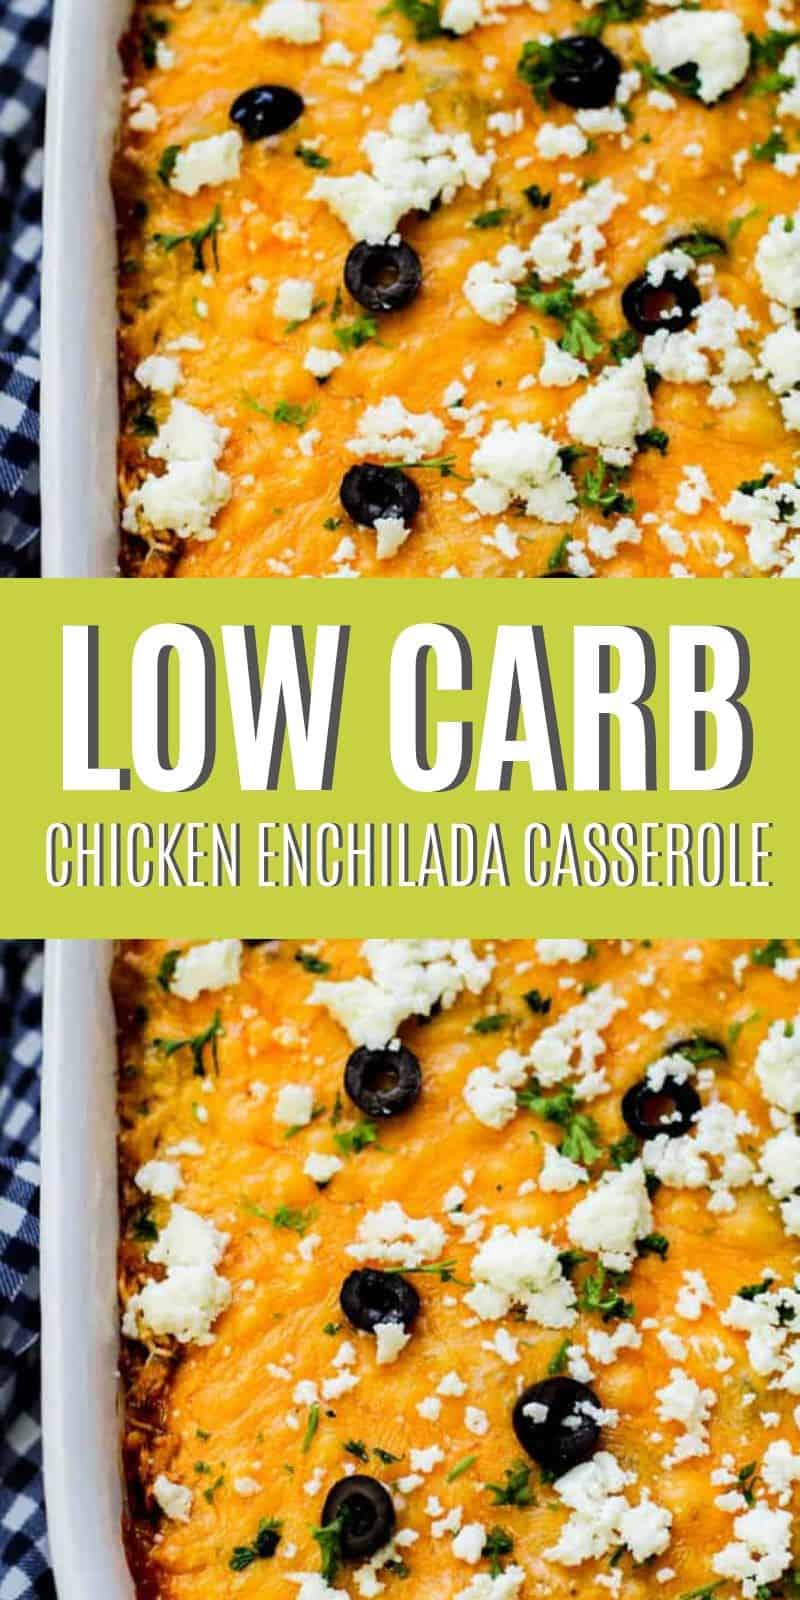 You going to love this new recipe! This low carb chicken enchilada casserole is so flavorful. If you are craving Tex-Mex and are on the low carb diet or keto diet, this will help take away those cravings!